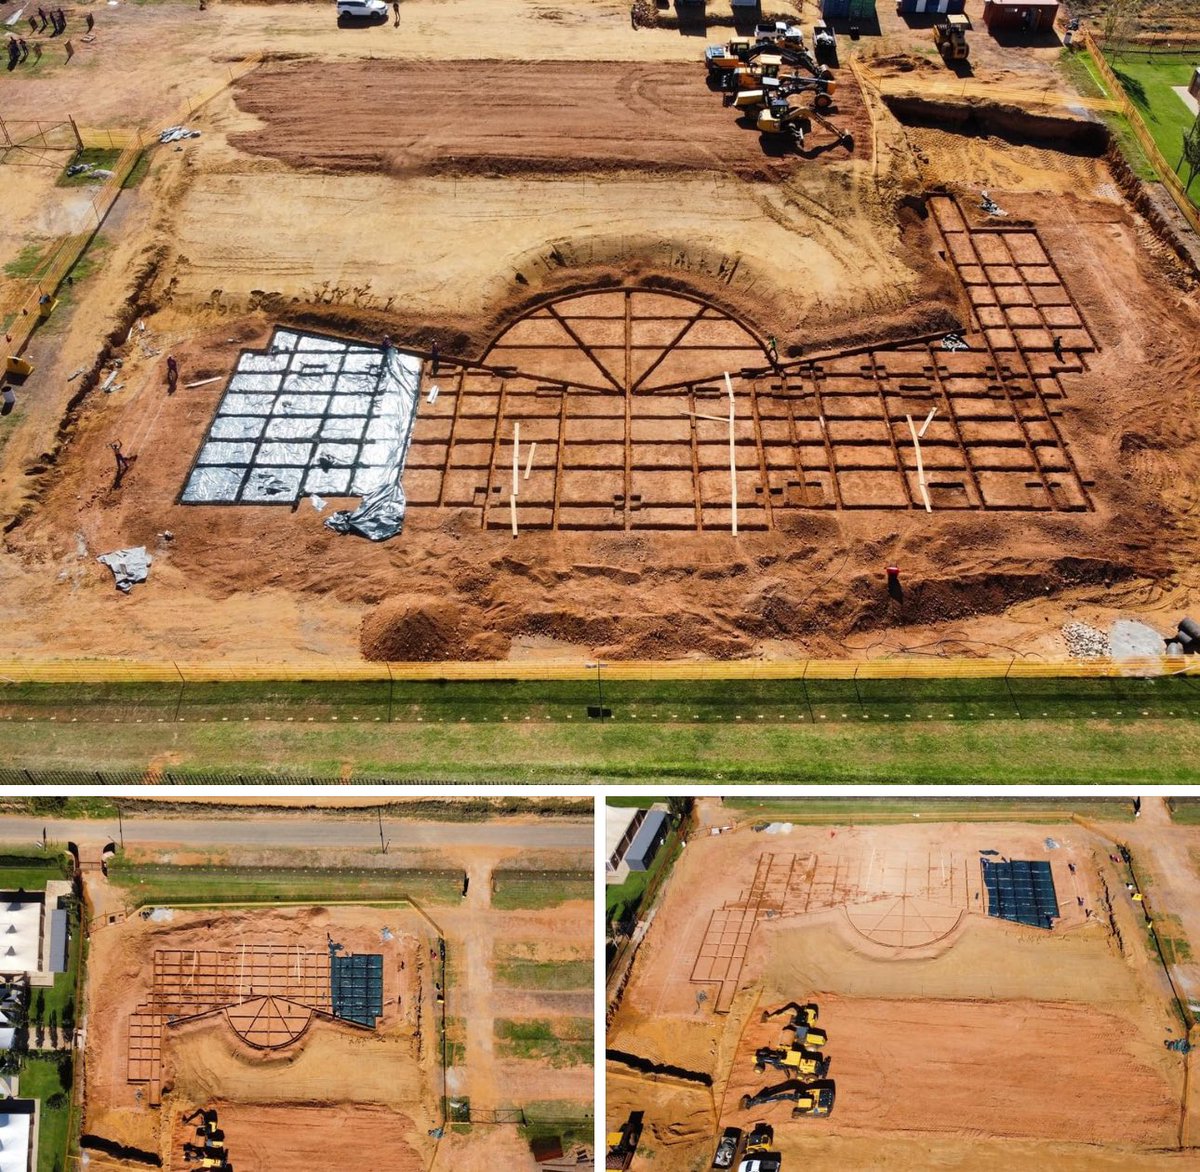 CRC Potch in the North West Province of South Africa. Setting out & Laying the foundation for a new sanctuary of faith & community 🏗️⛪ #dbmarchitects #design #Church #CRC #CRCPotchefstroom #Construction #SouthAfrica